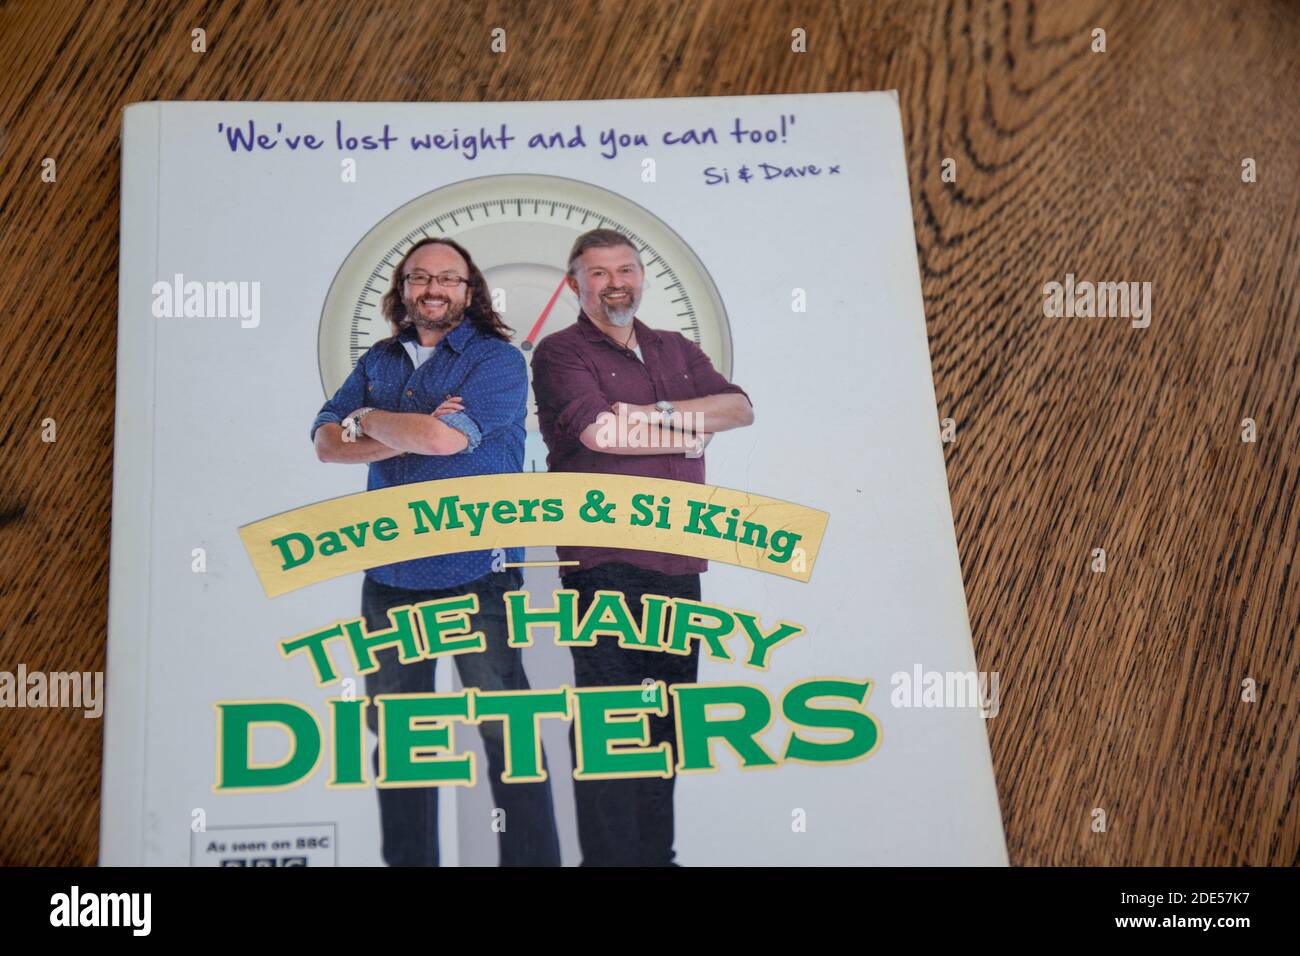 Durham, UK - 20 Nov 2020: Si King and David Myers Hairy Dieters celebrity cook book by the Hairy Bikers. Celeb chefs teach how to cook real food but s Stock Photo